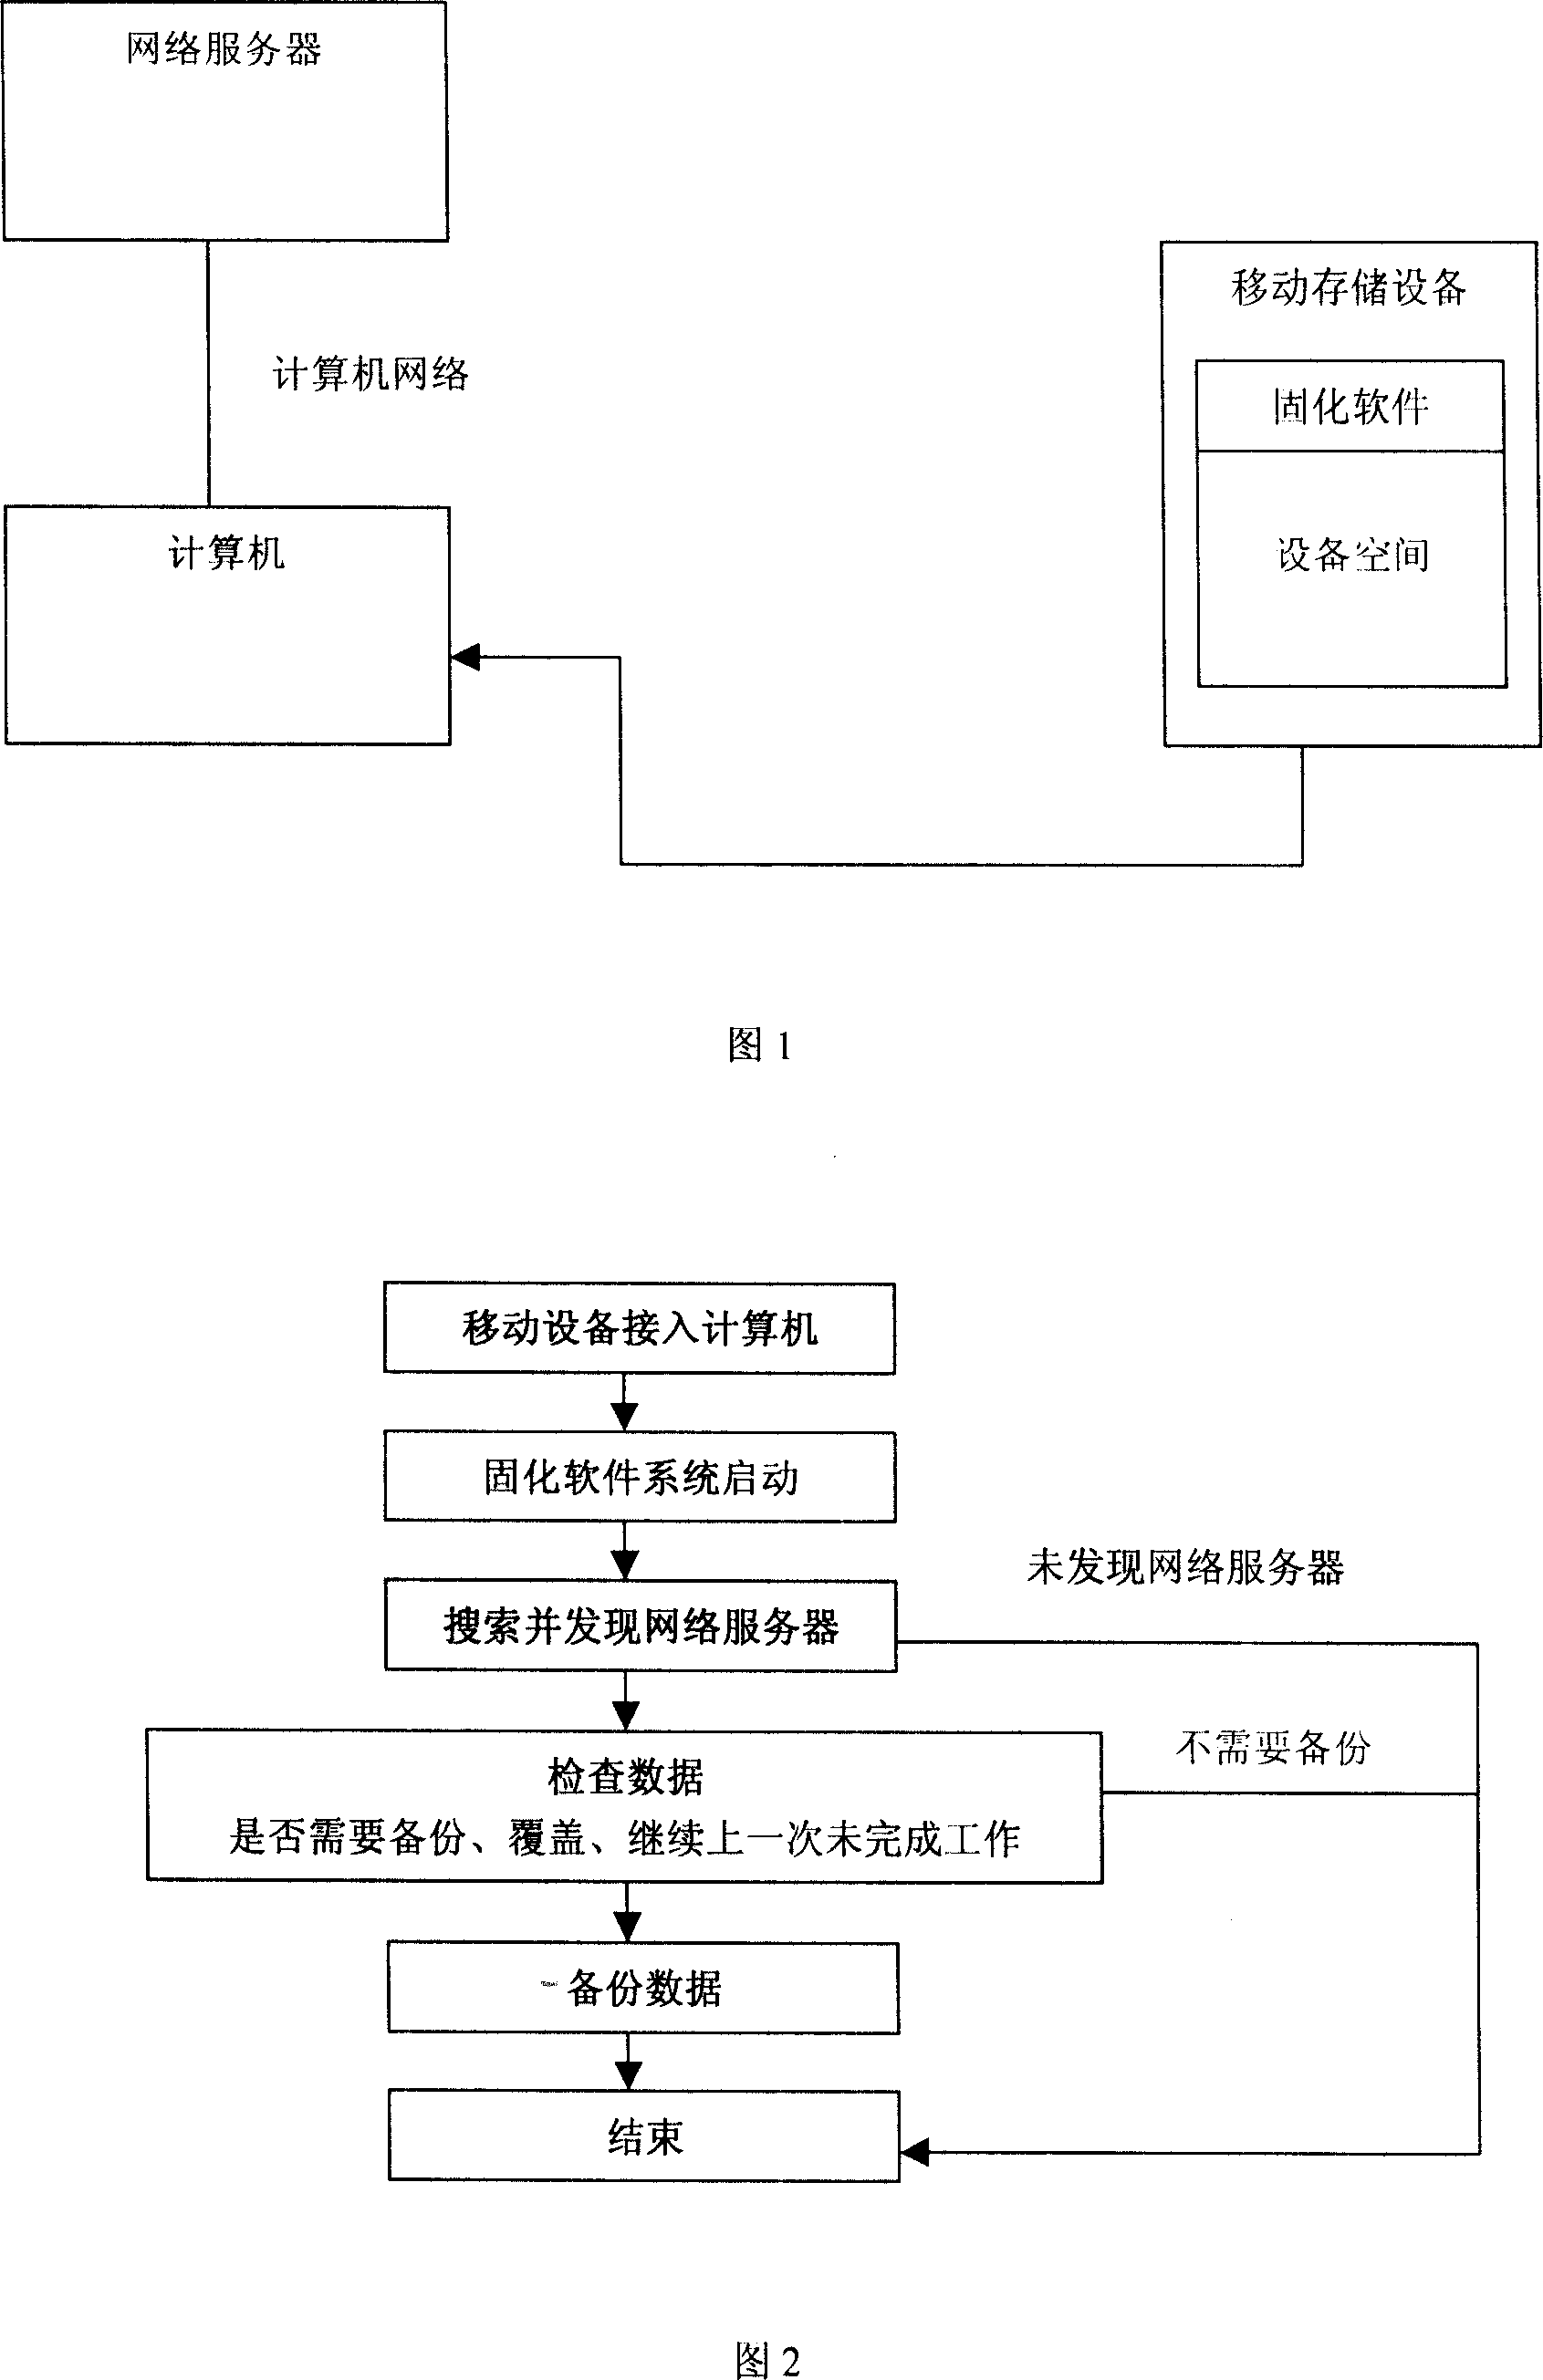 Process for realizing soft enlarging and network backup in movable memory apparatus